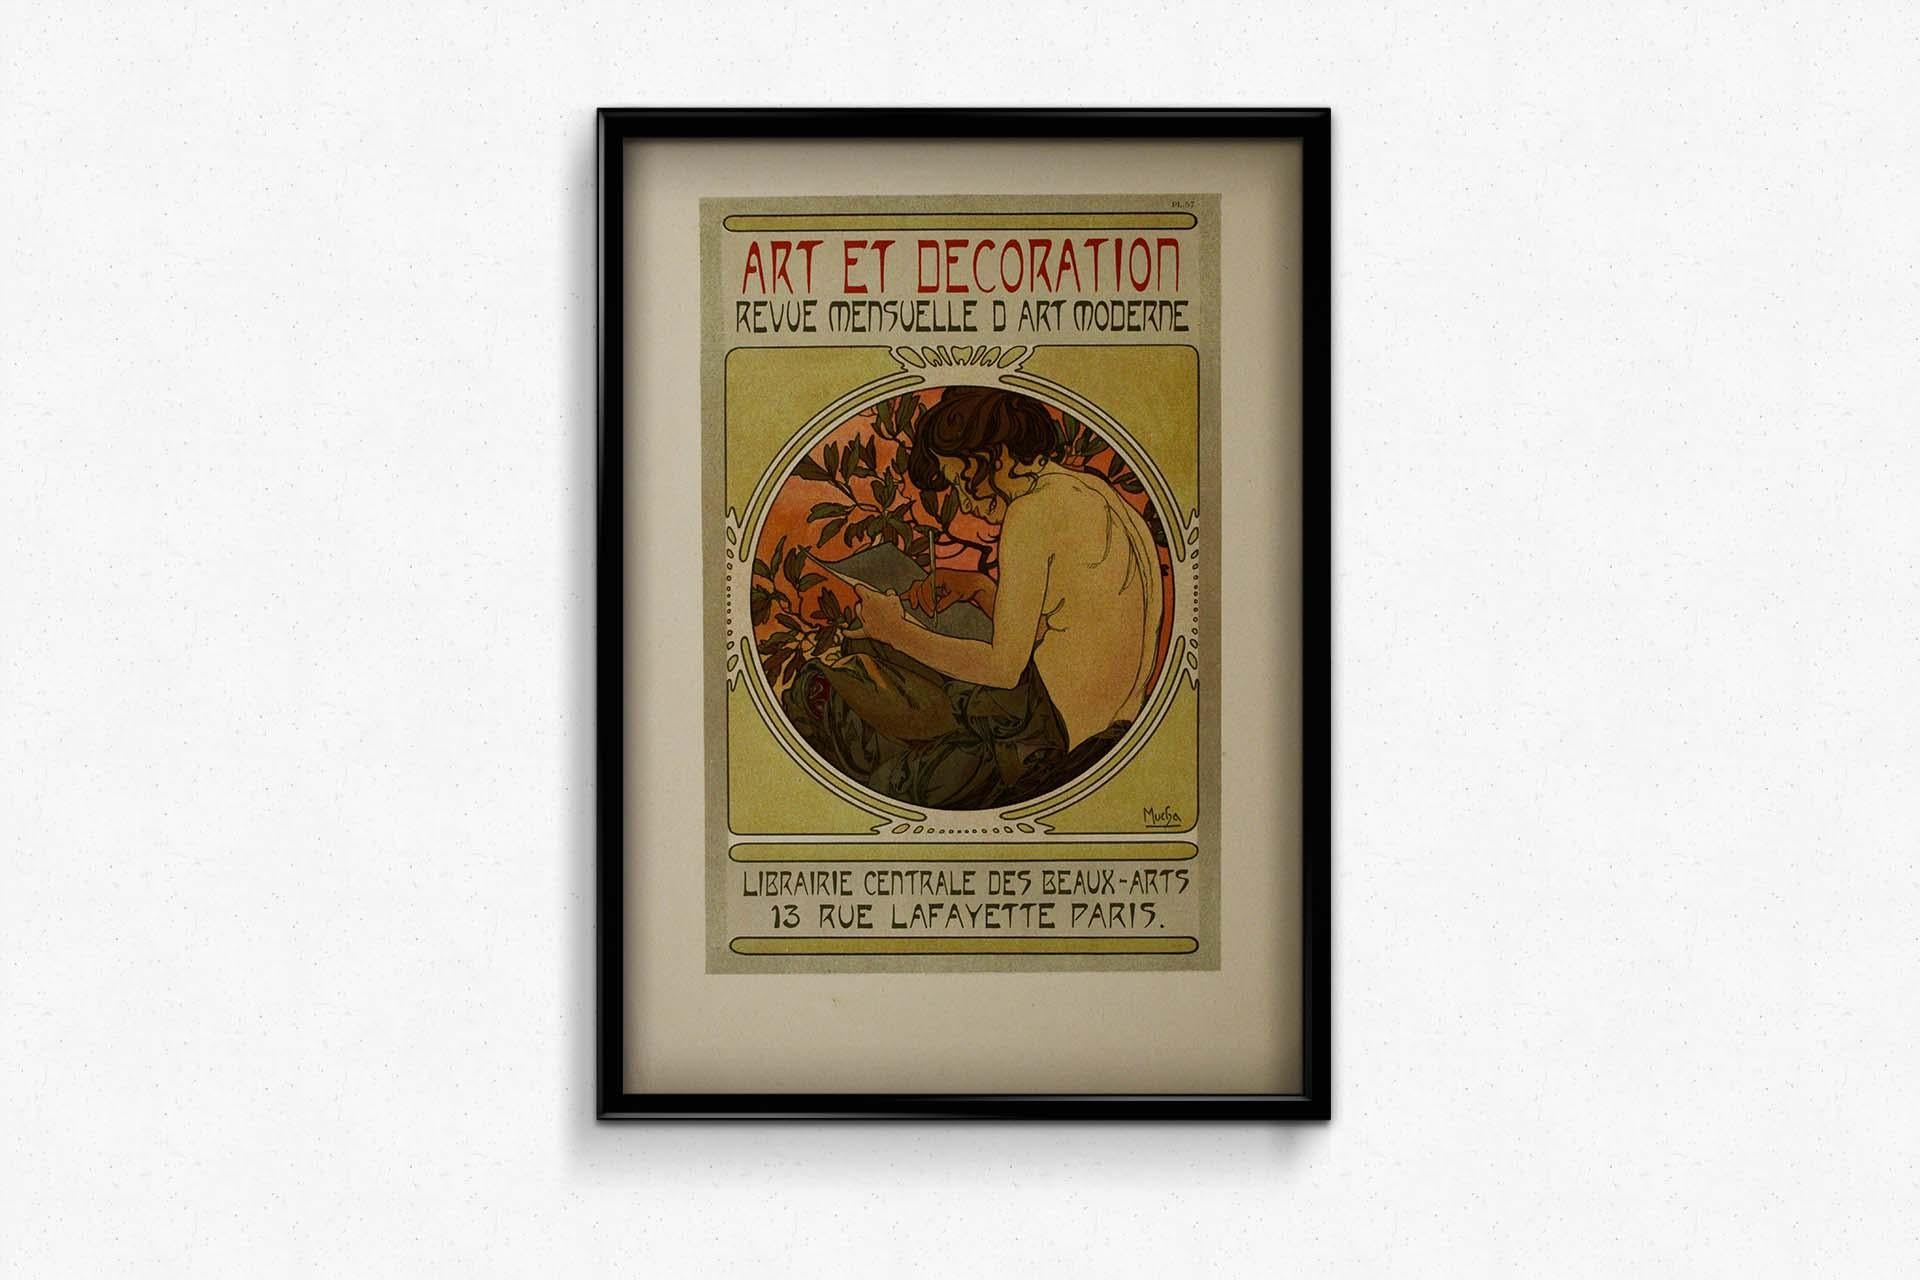 Alphonse Mucha's name shines like that of a visionary artist who left an indelible mark on the aesthetics of the early 20th century. The year 1902 saw the publication of 